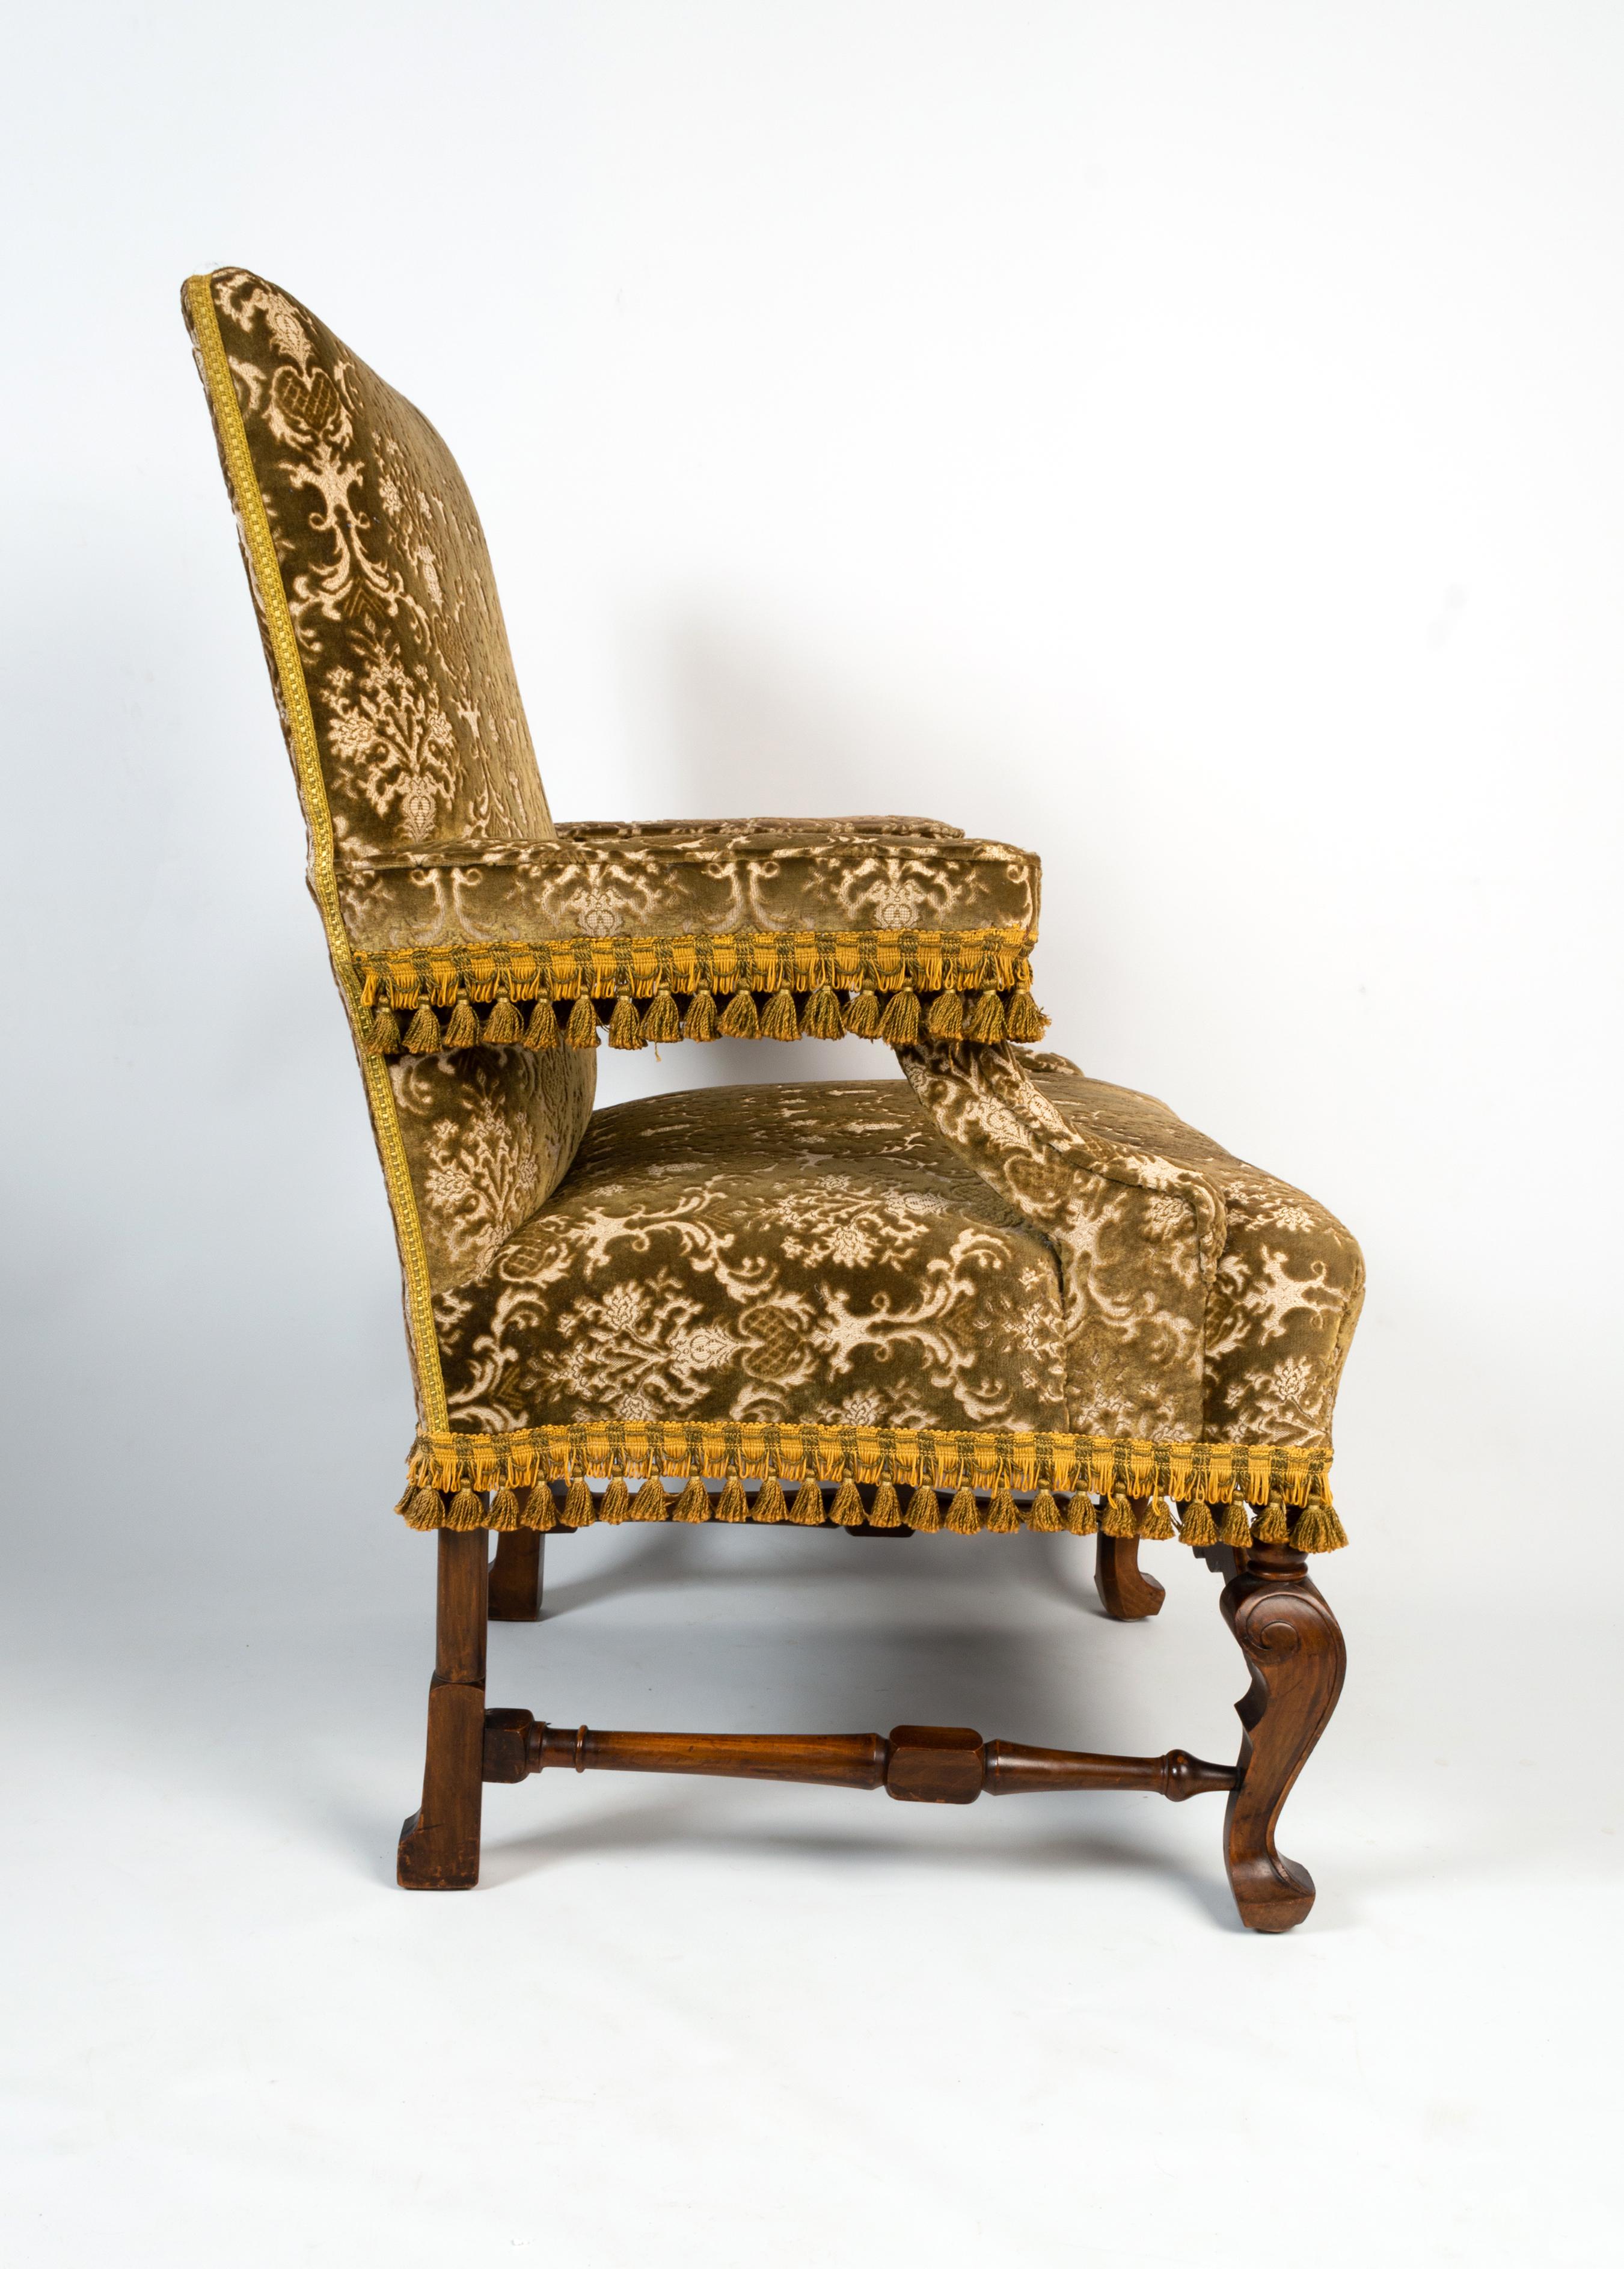 Antique English William and Mary Revival Elbow Chair Armchair 2